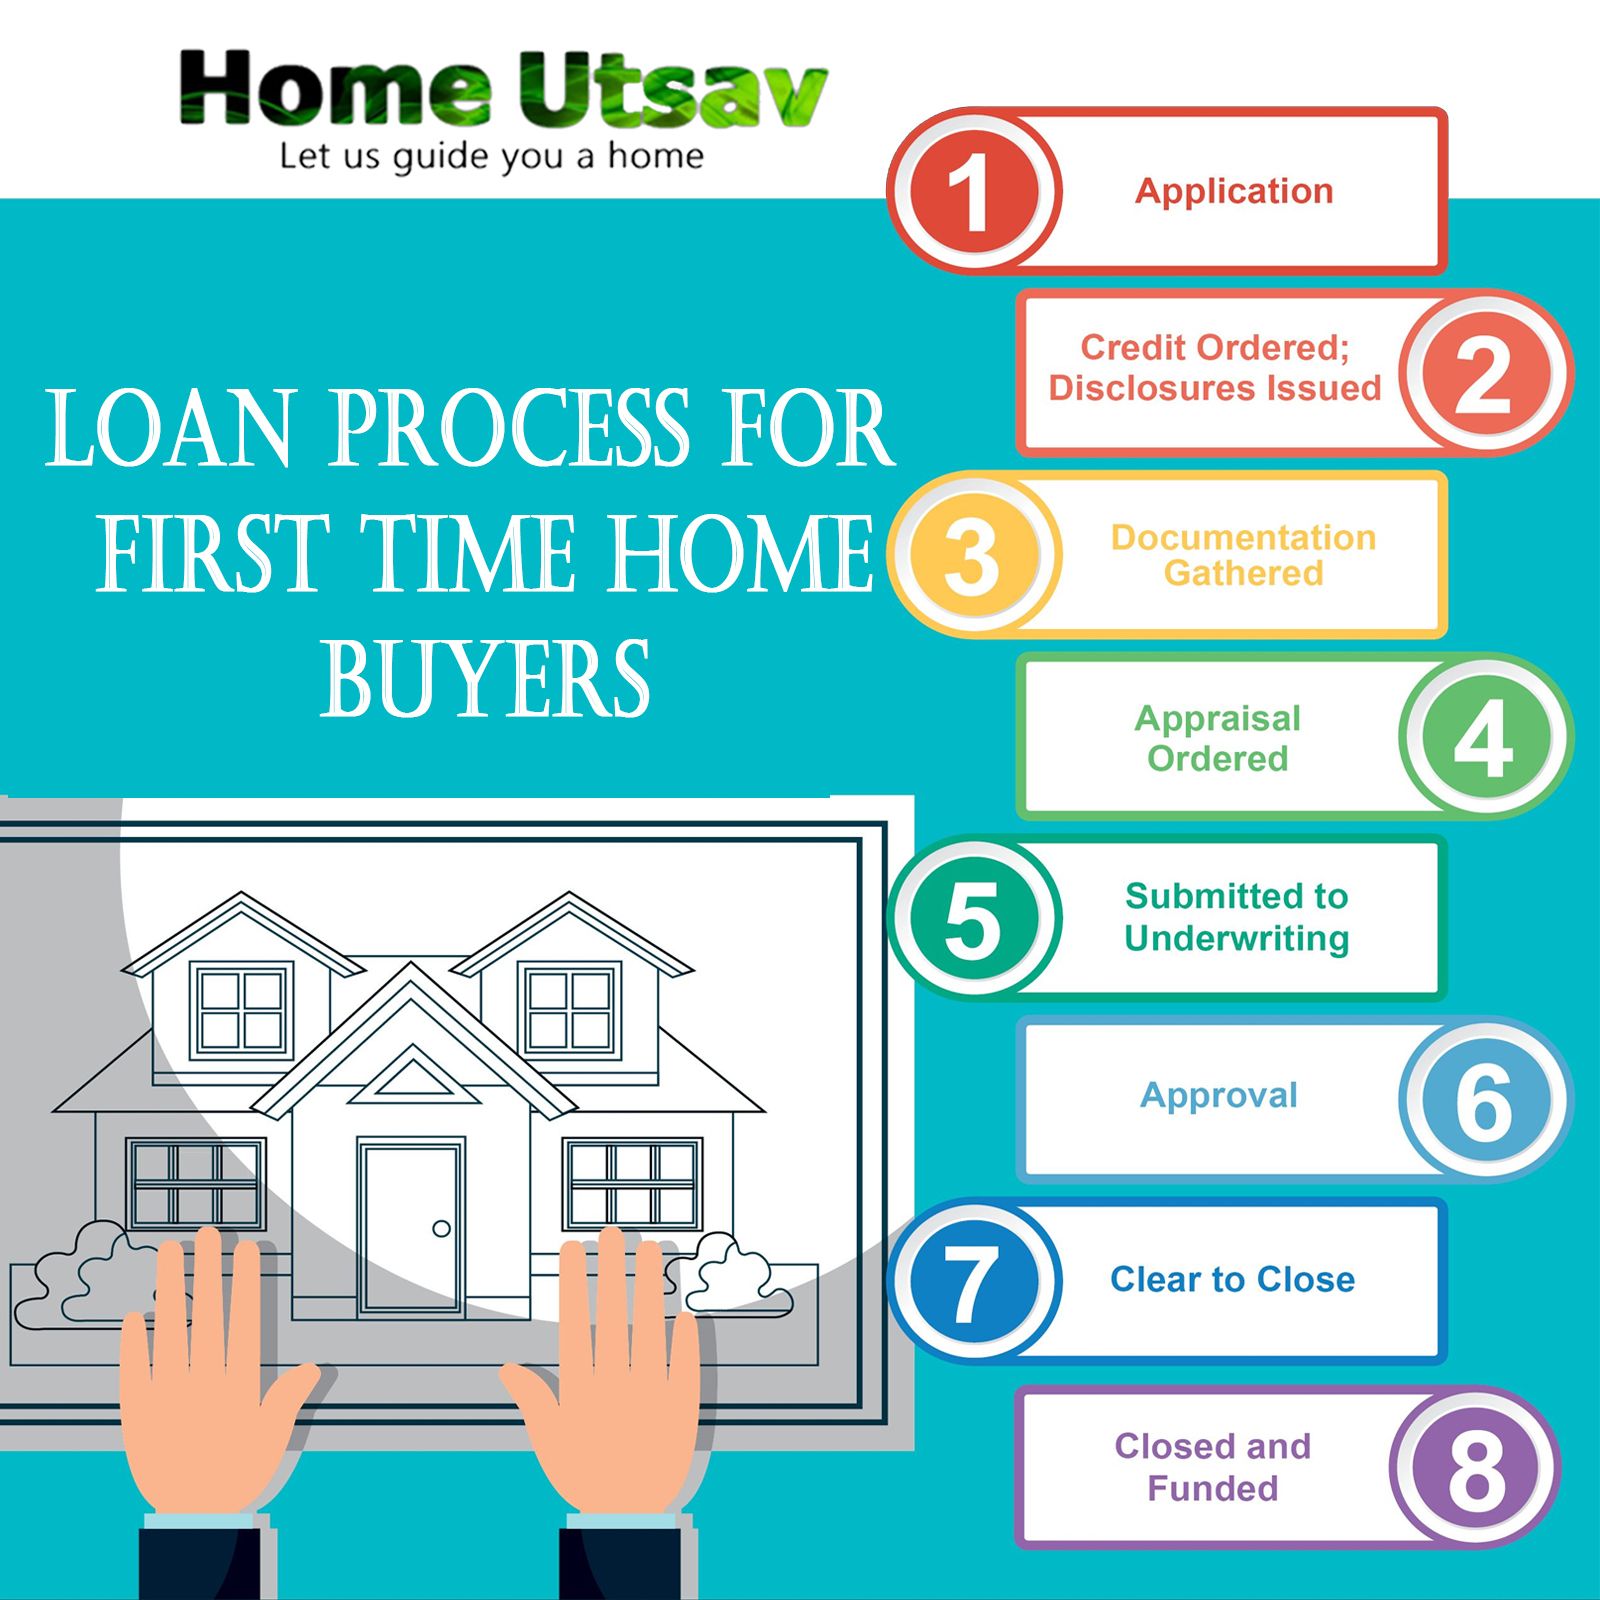 How Long Does The Underwriting Process Take For A Mortgage